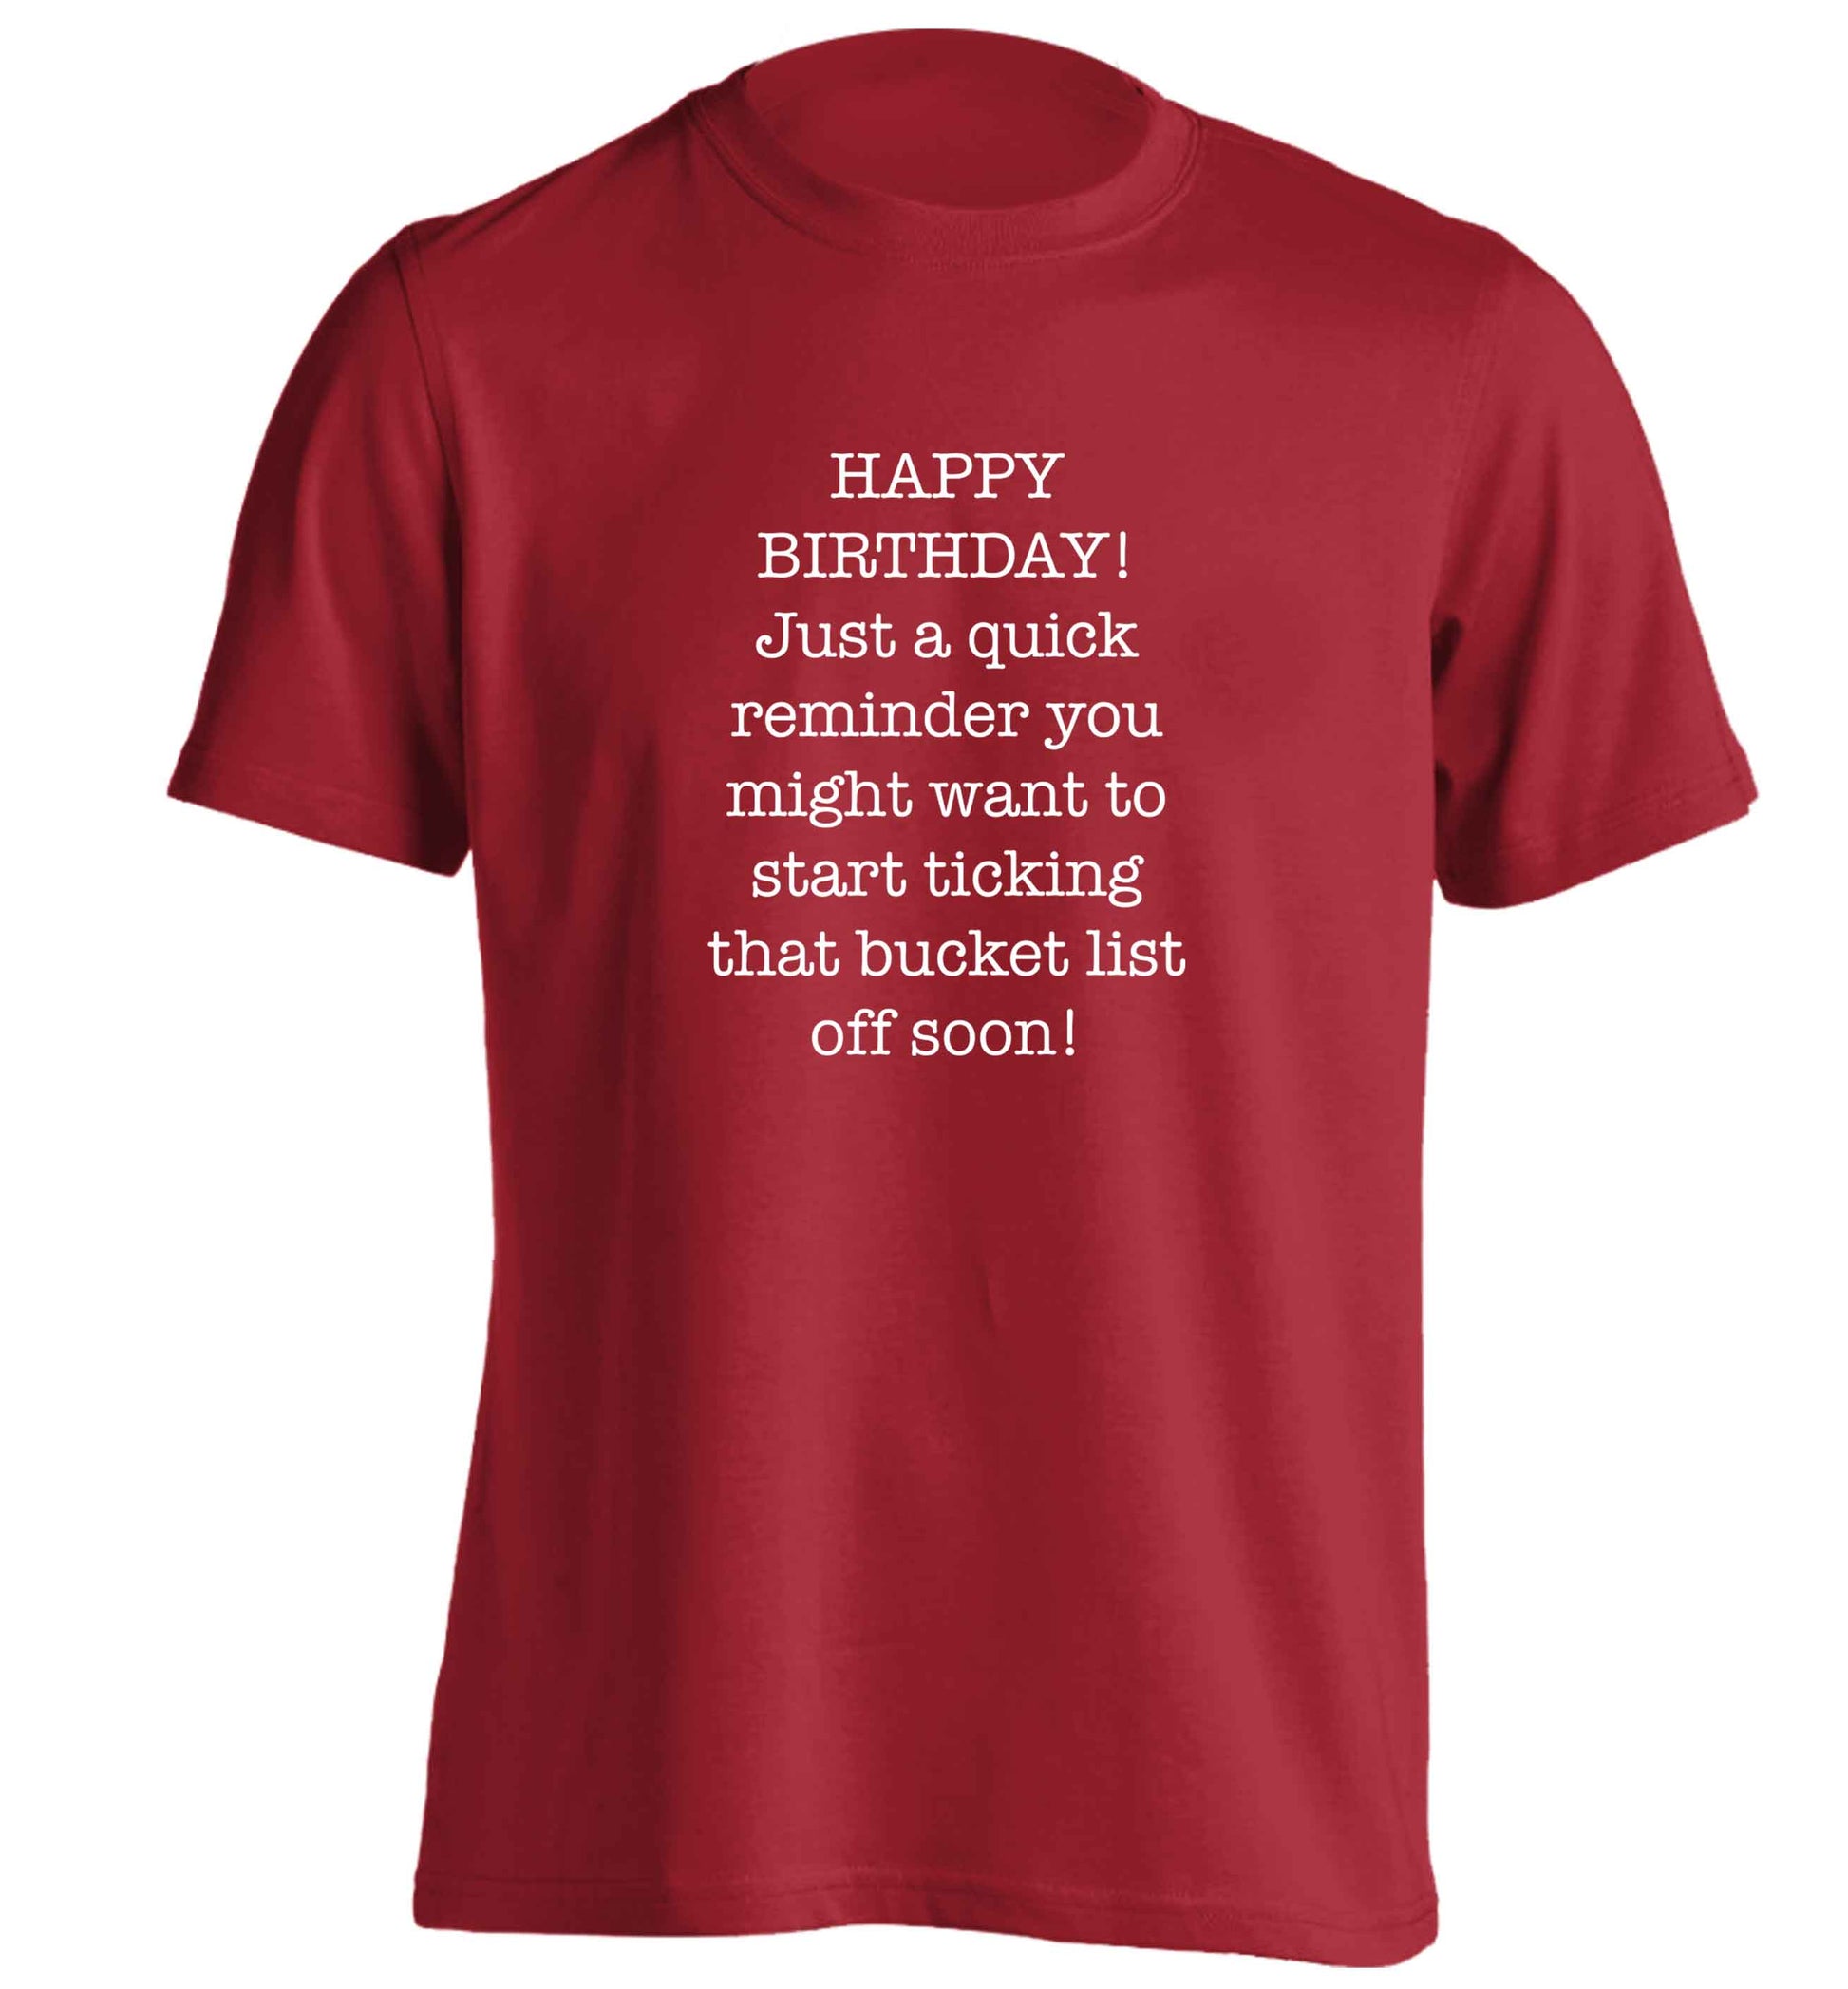 Happy birthday, just a quick reminder you might want to start ticking that bucket list off soon adults unisex red Tshirt 2XL